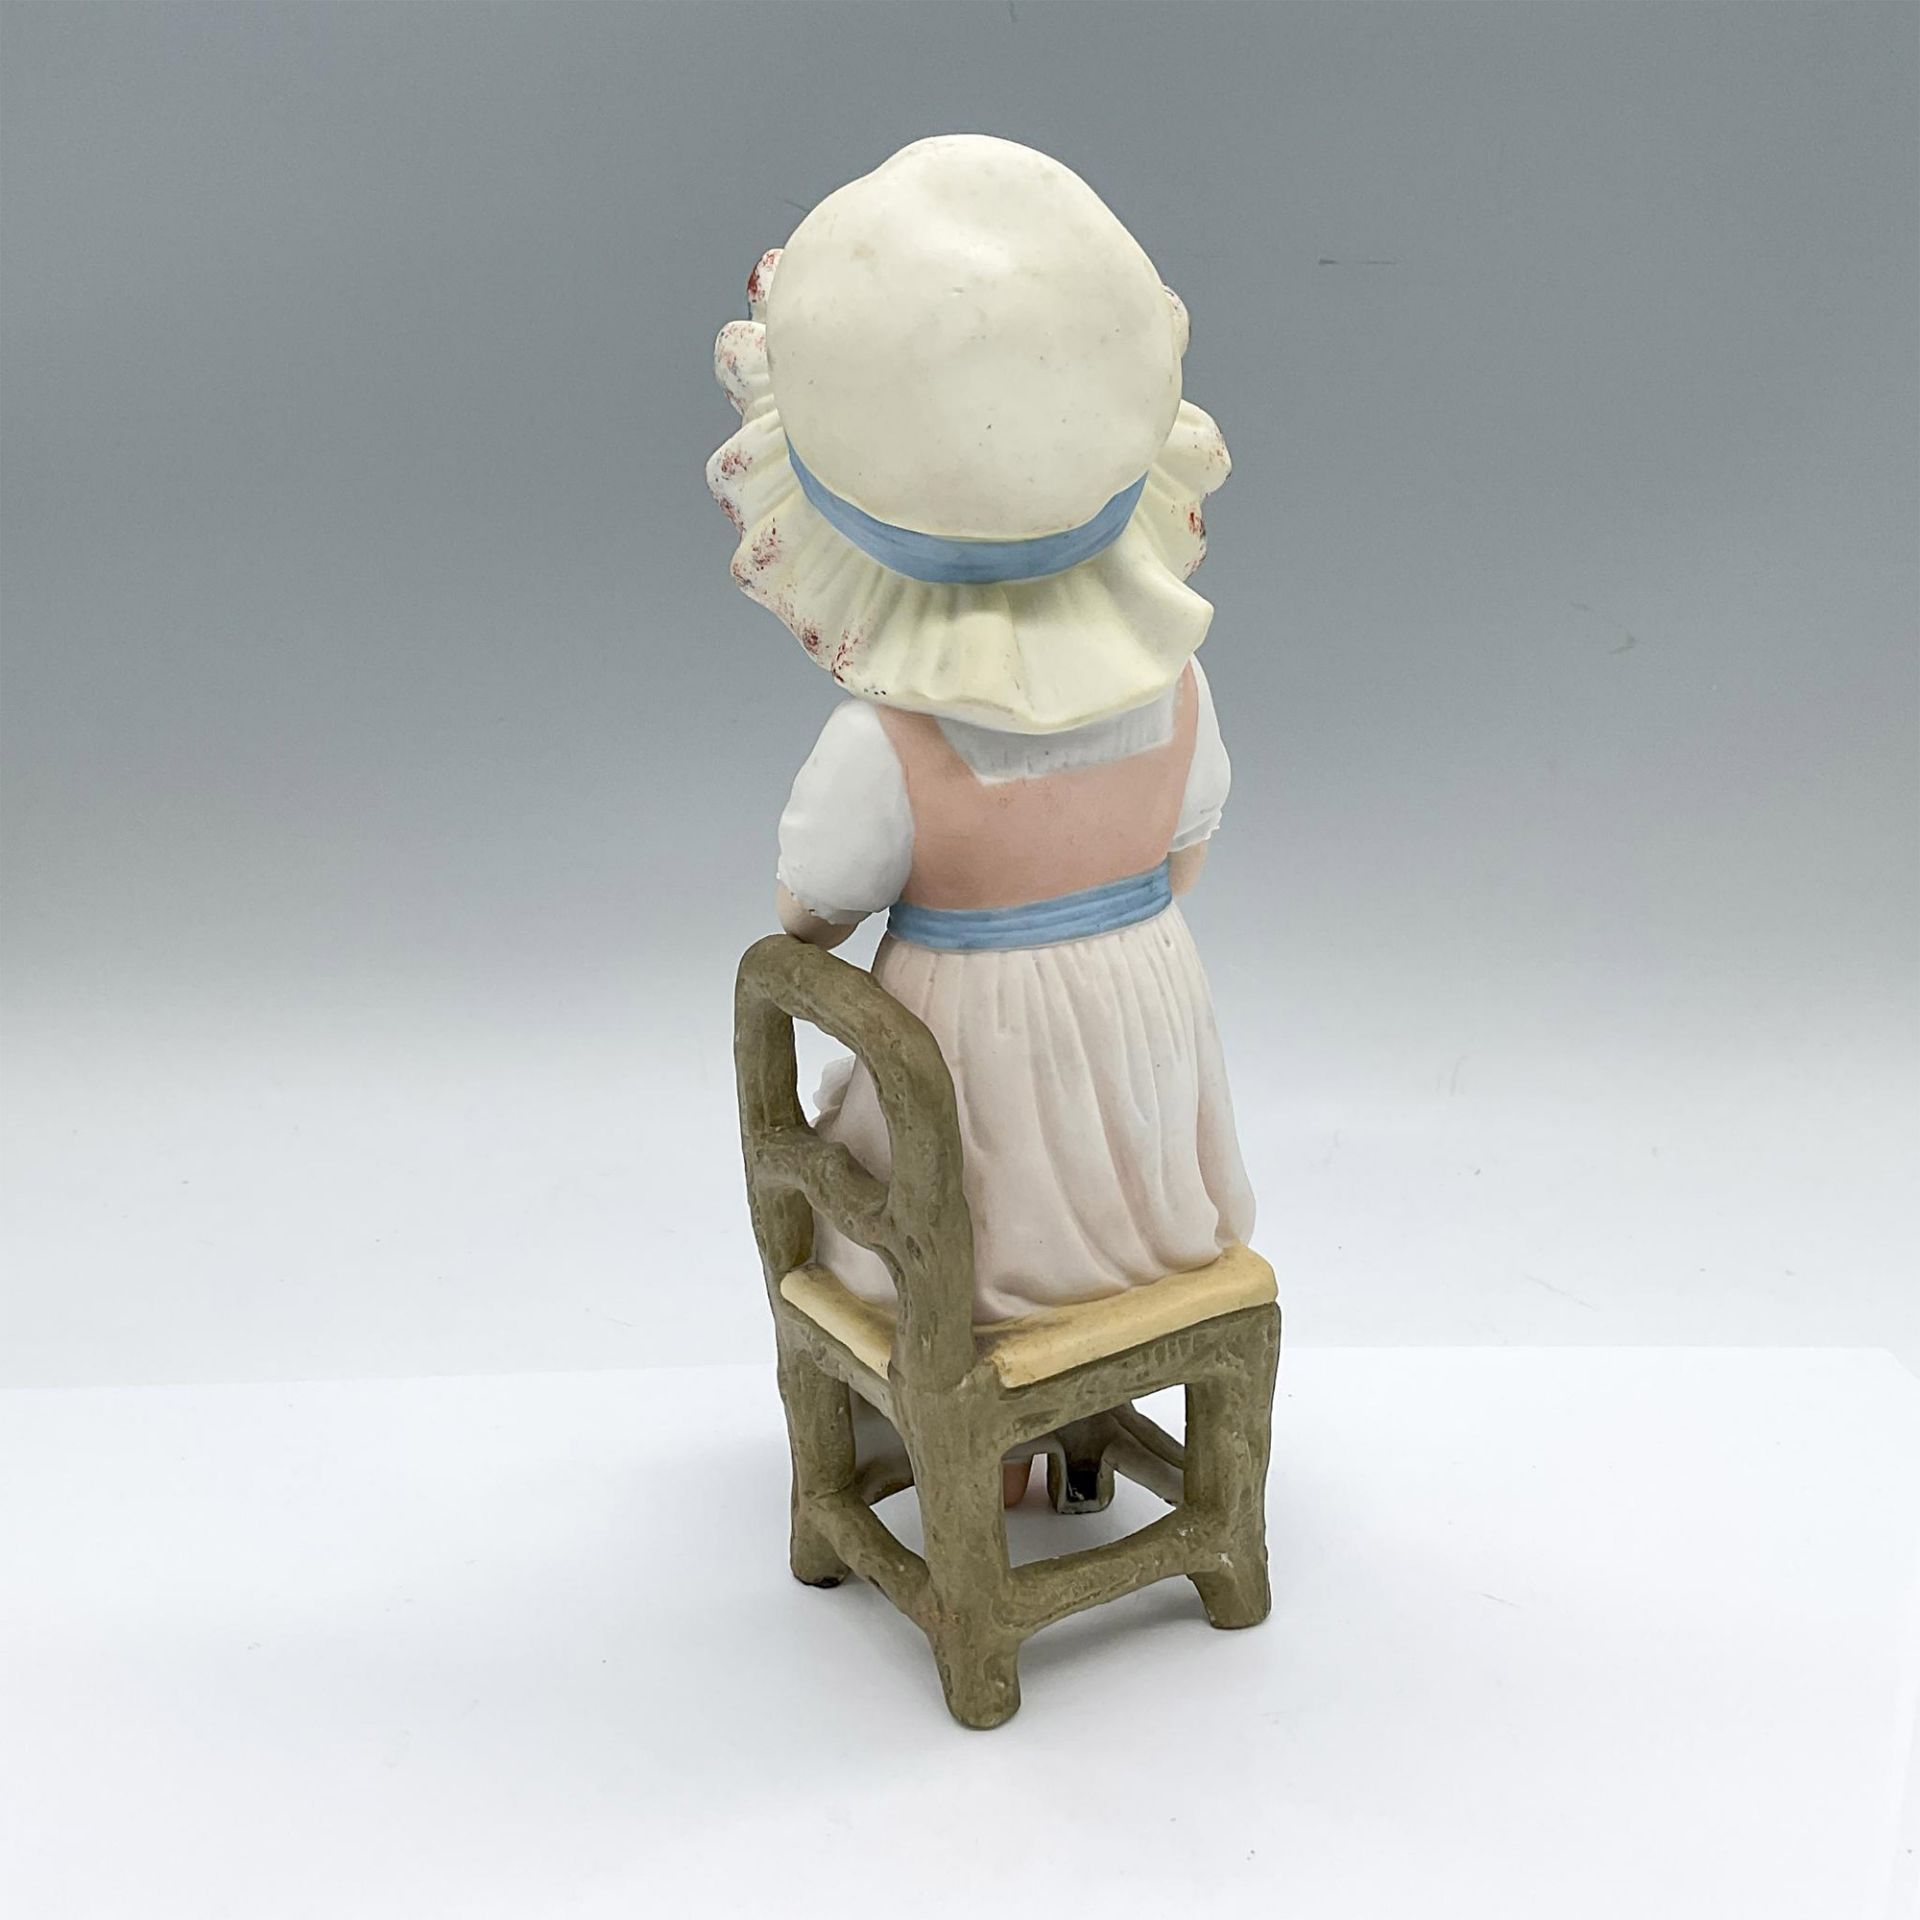 German Bisque Piano Baby Figurine - Image 2 of 3